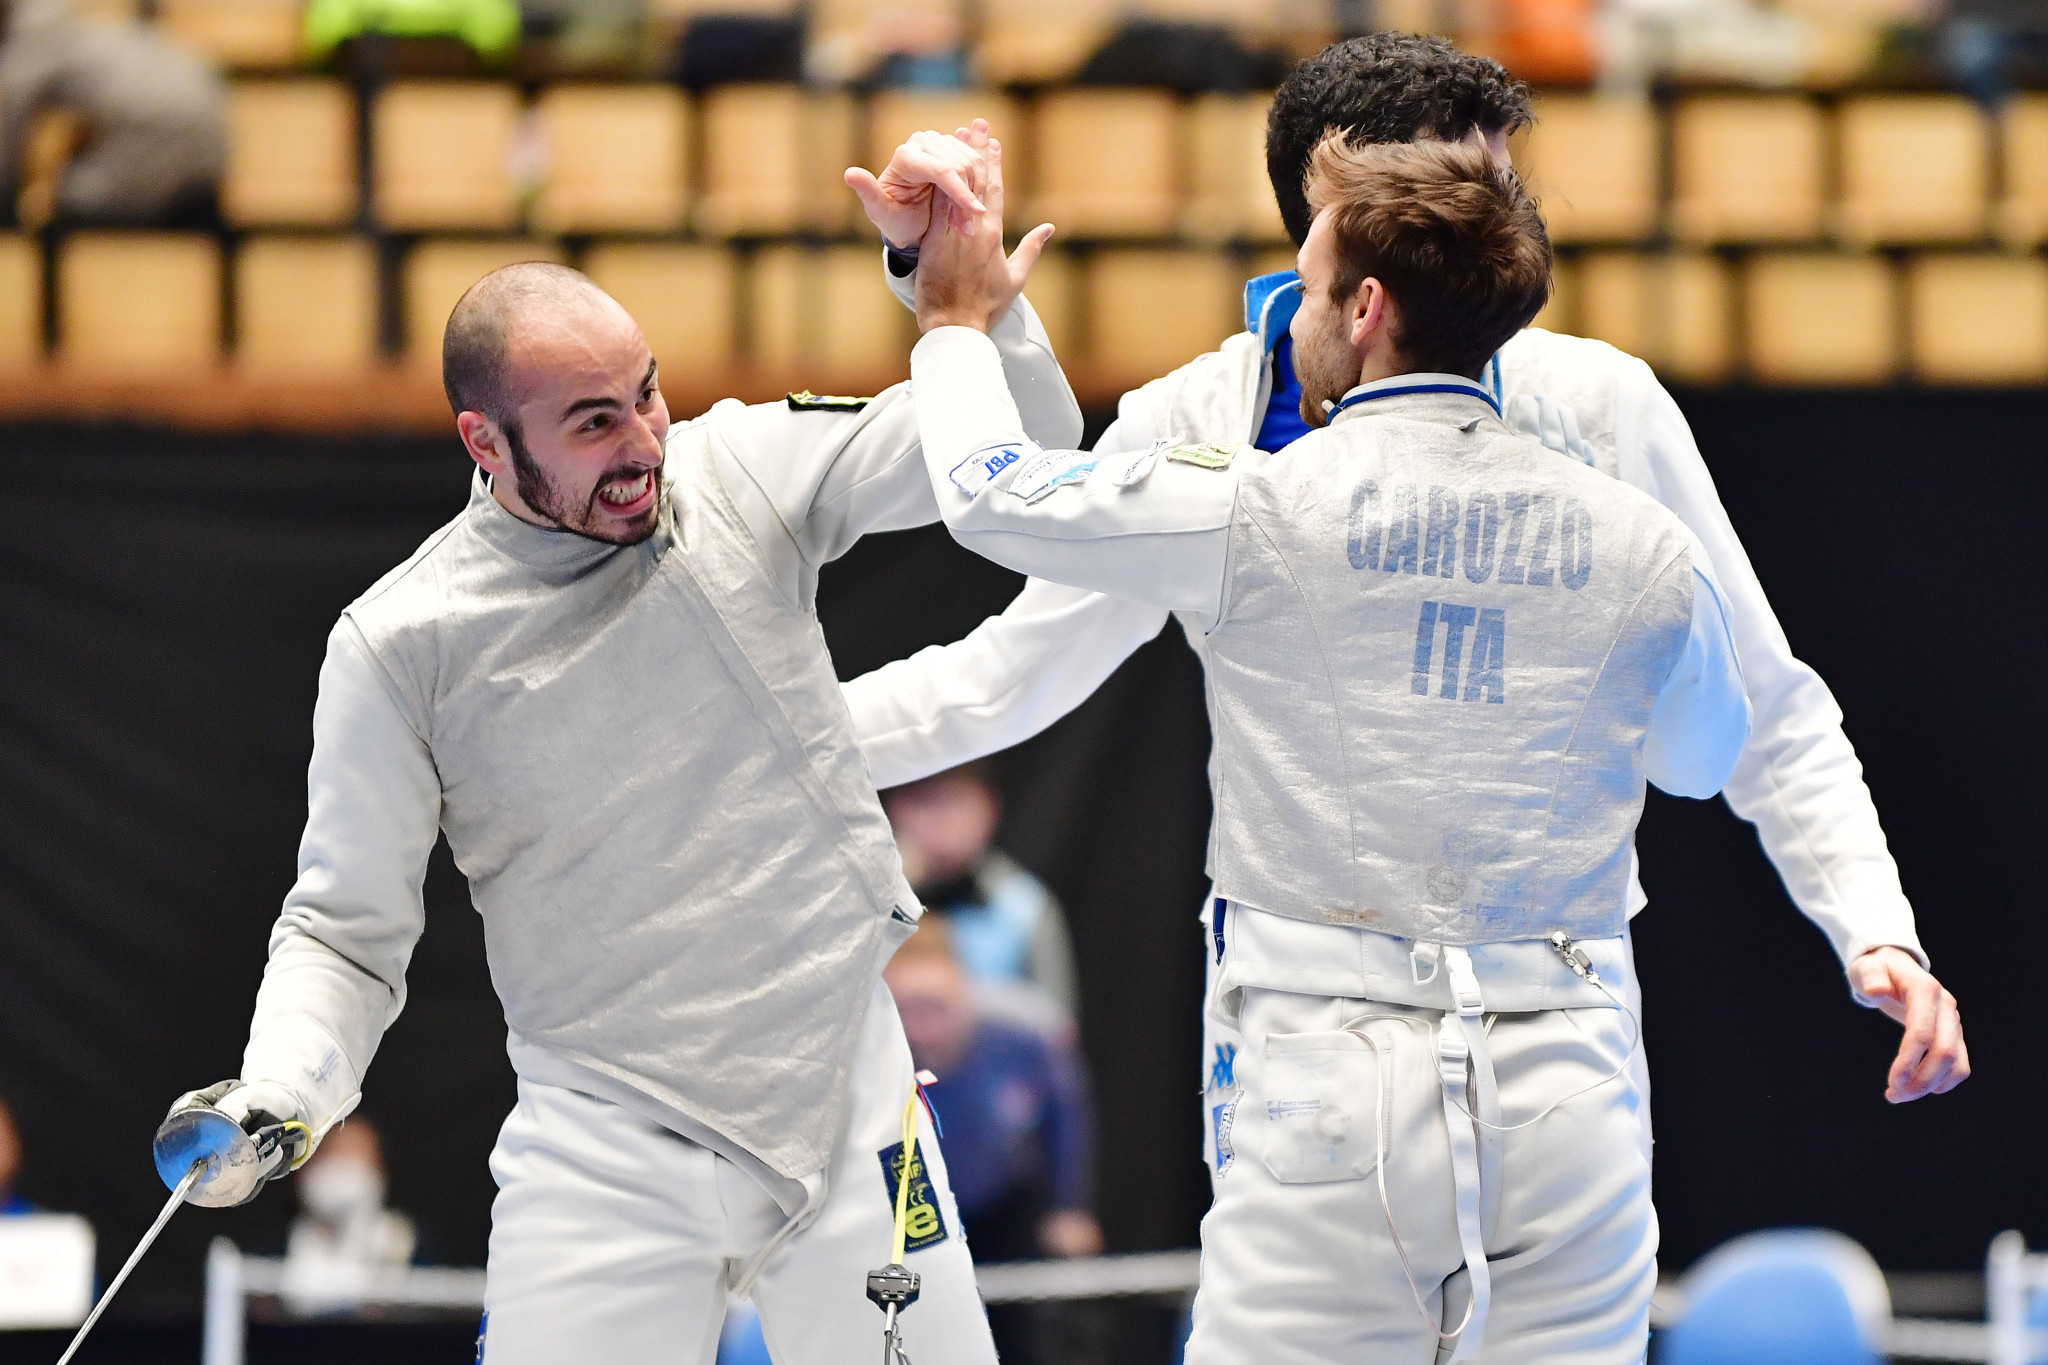 Italy triumphed at the team event at FIE Sabre World Cup in Madrid ©Getty Images